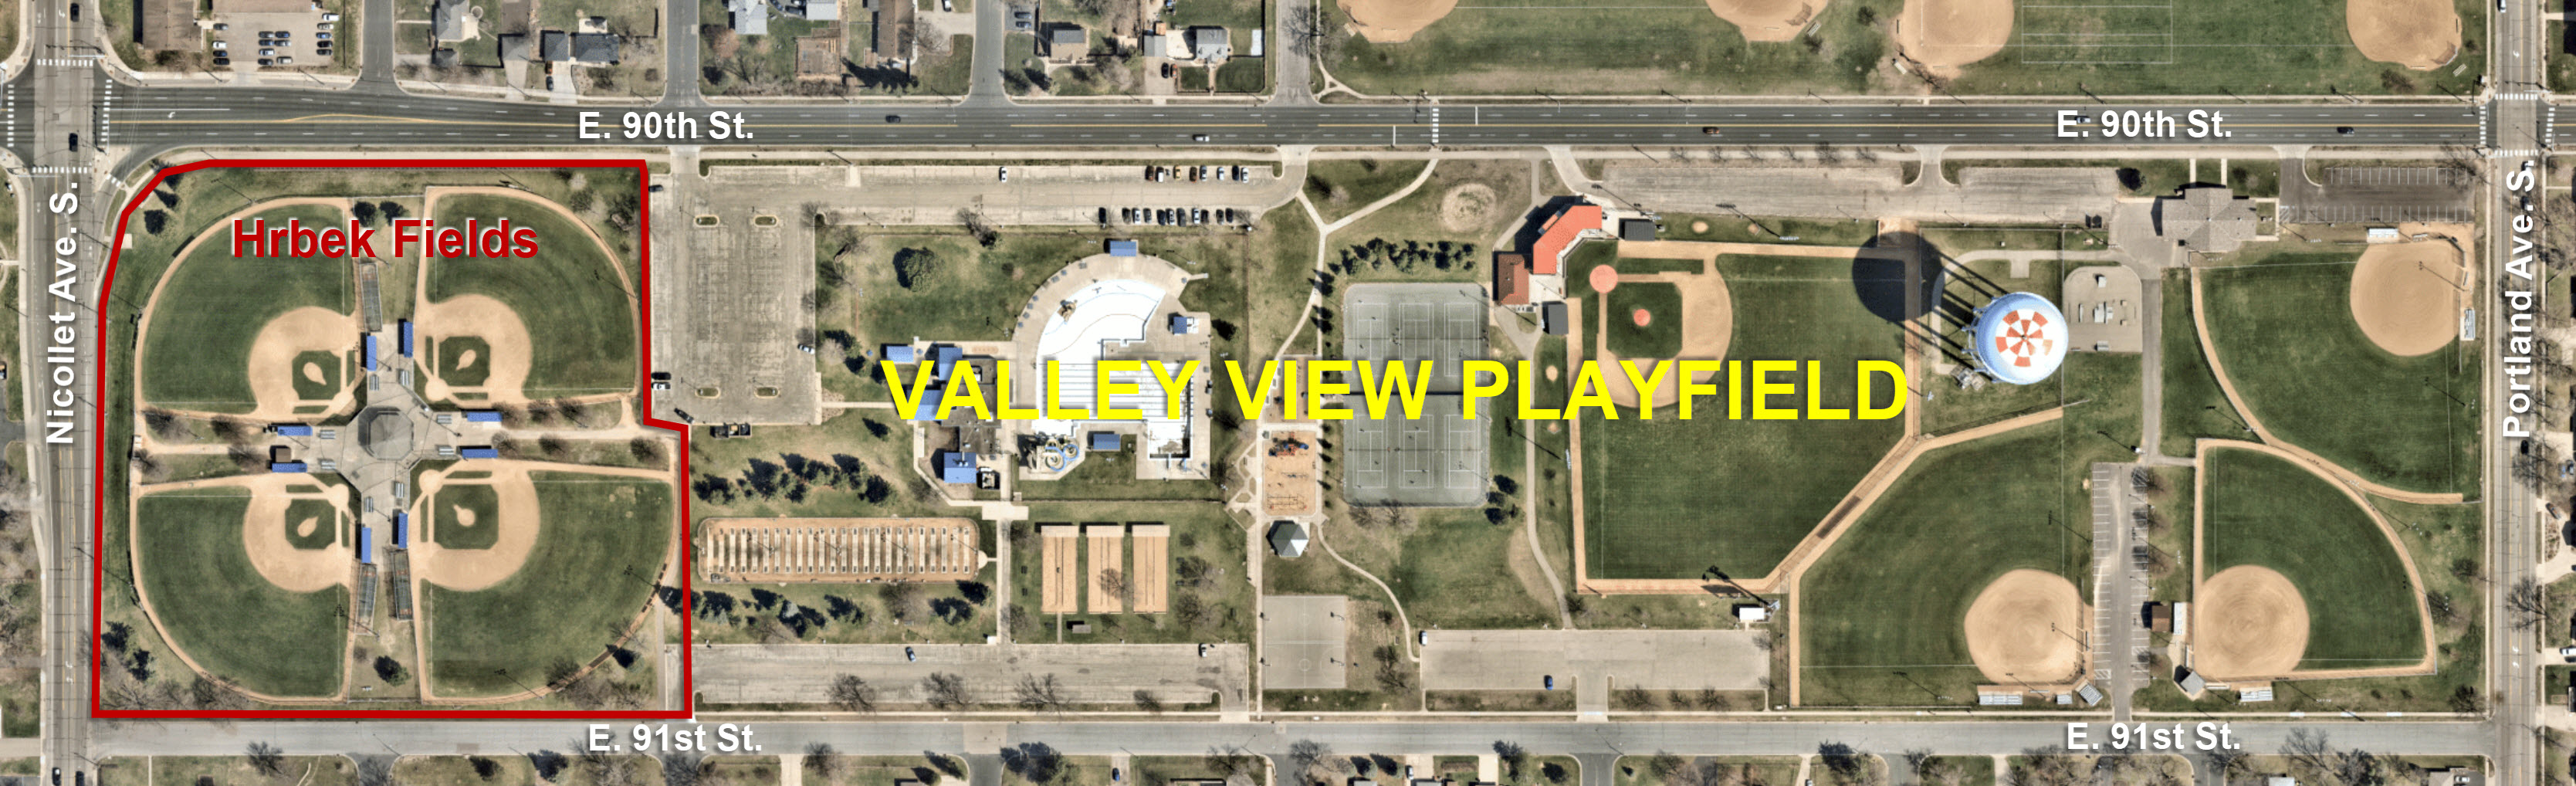 Hrbek Fields at Valley View Playfield